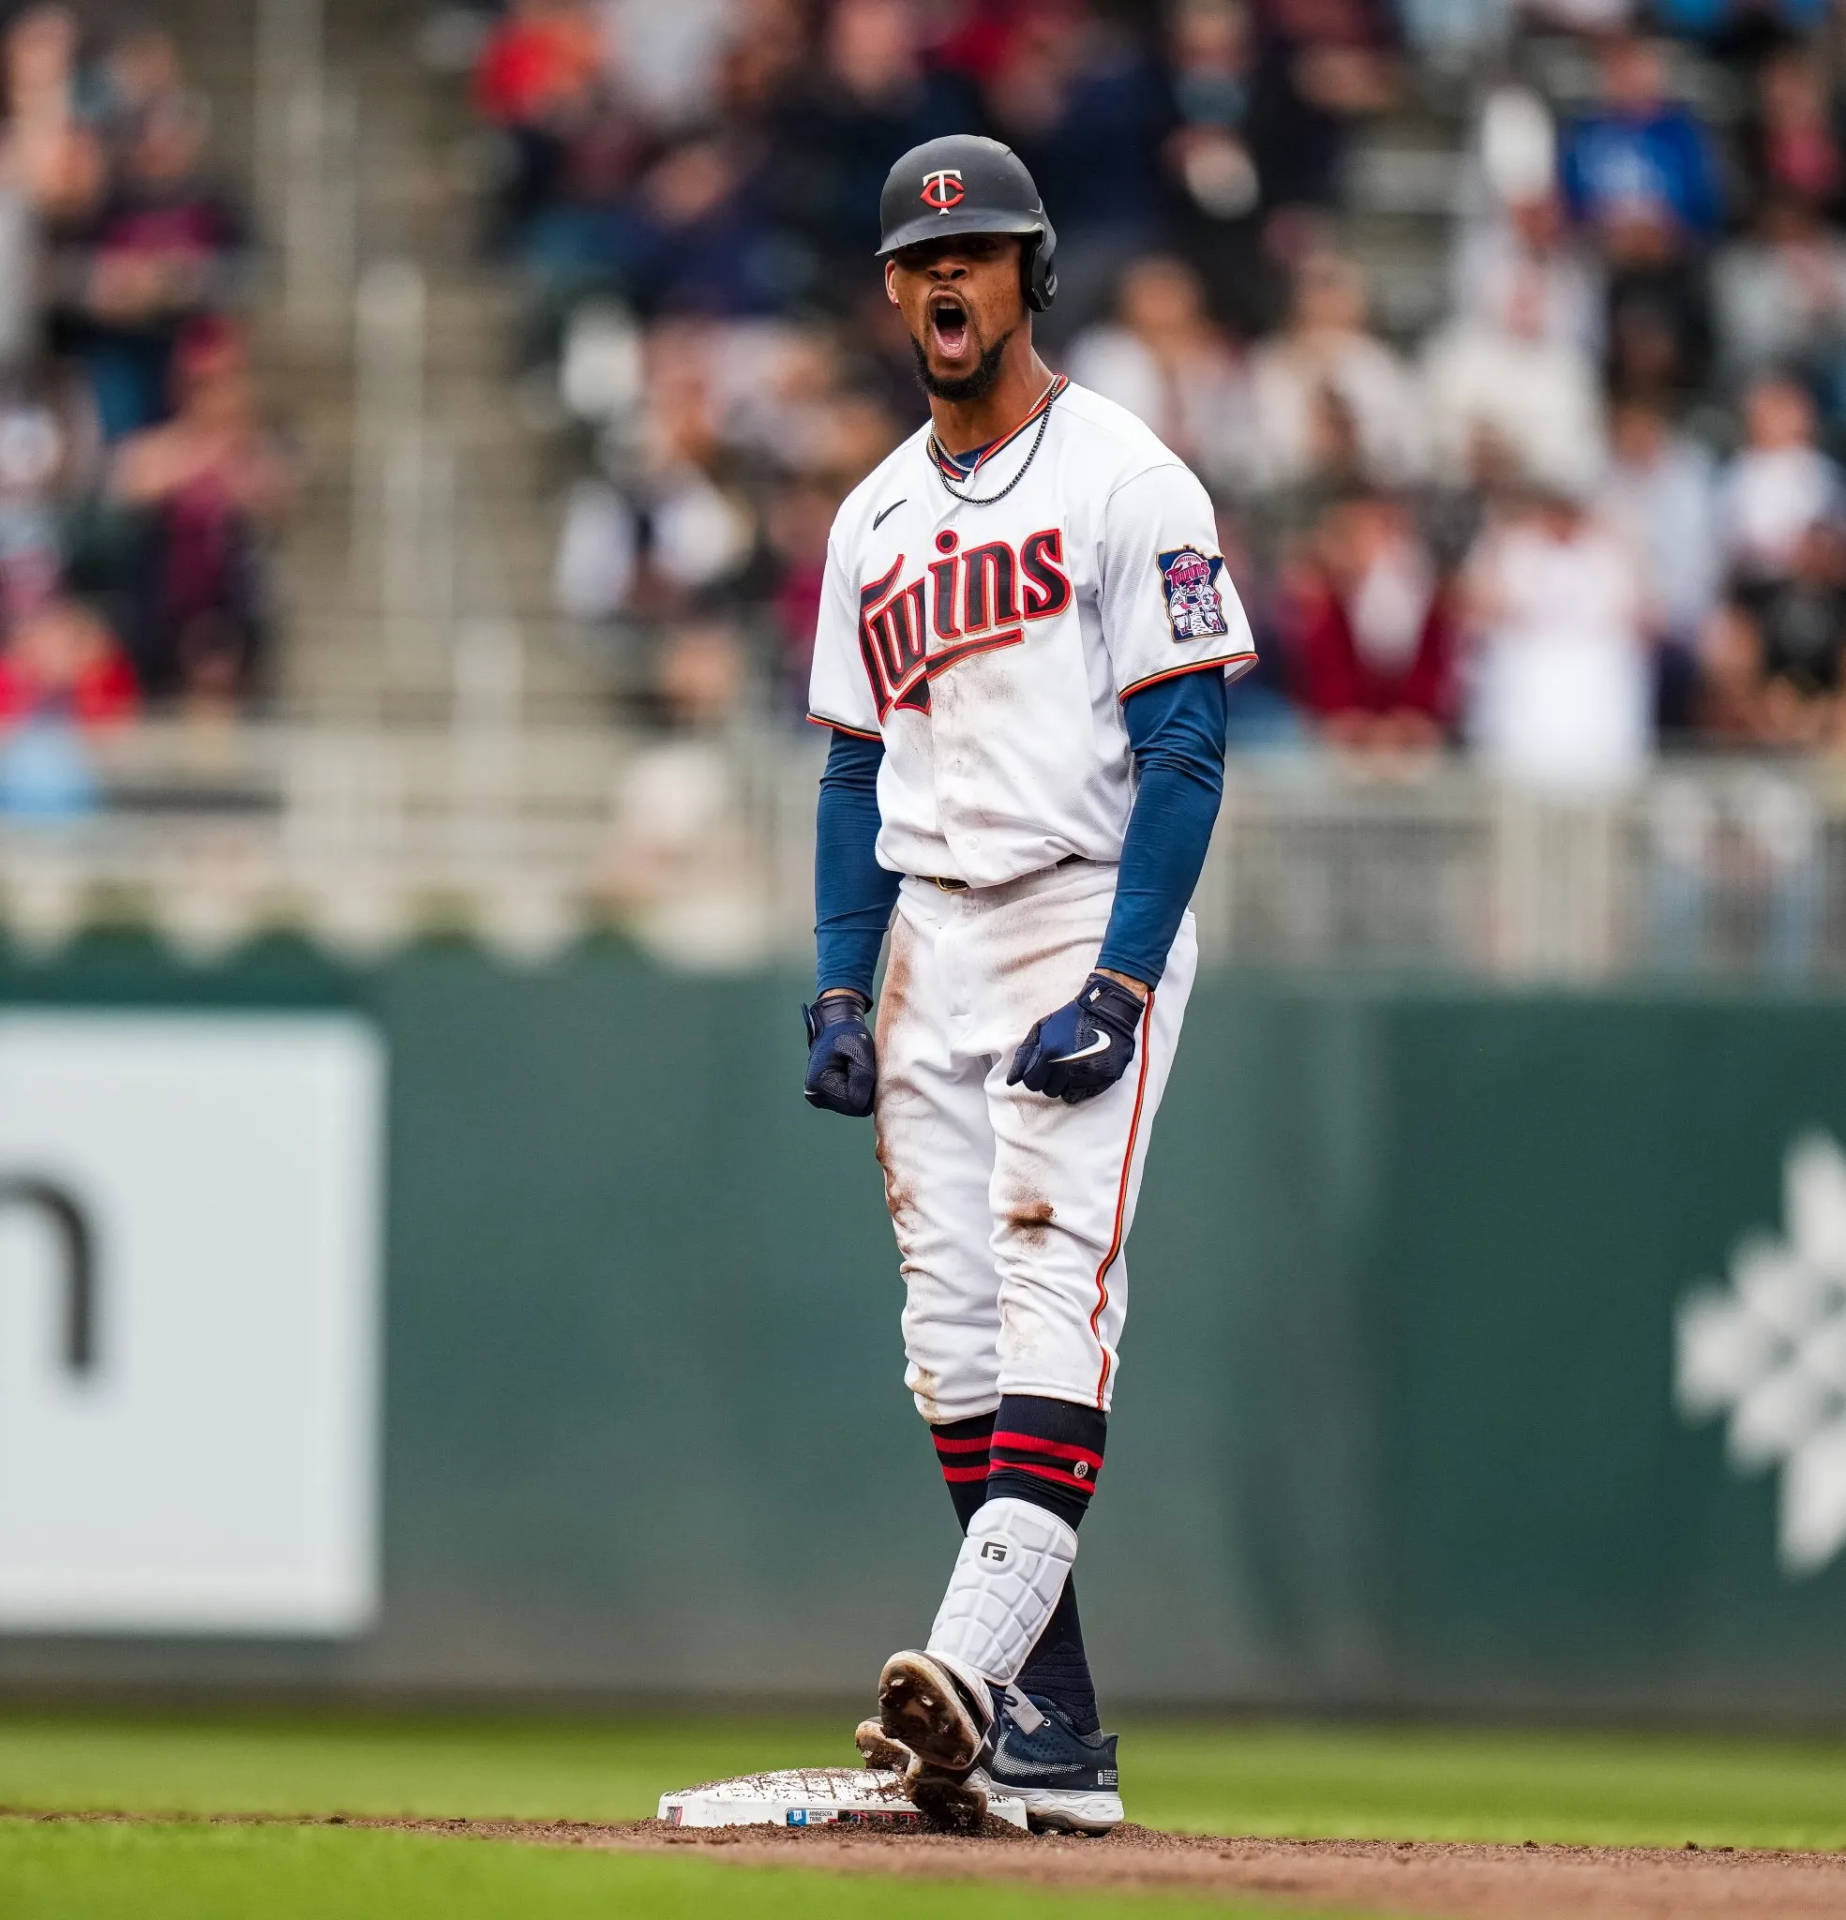 Download Byron Buxton In Light Blue Jersey Wallpaper